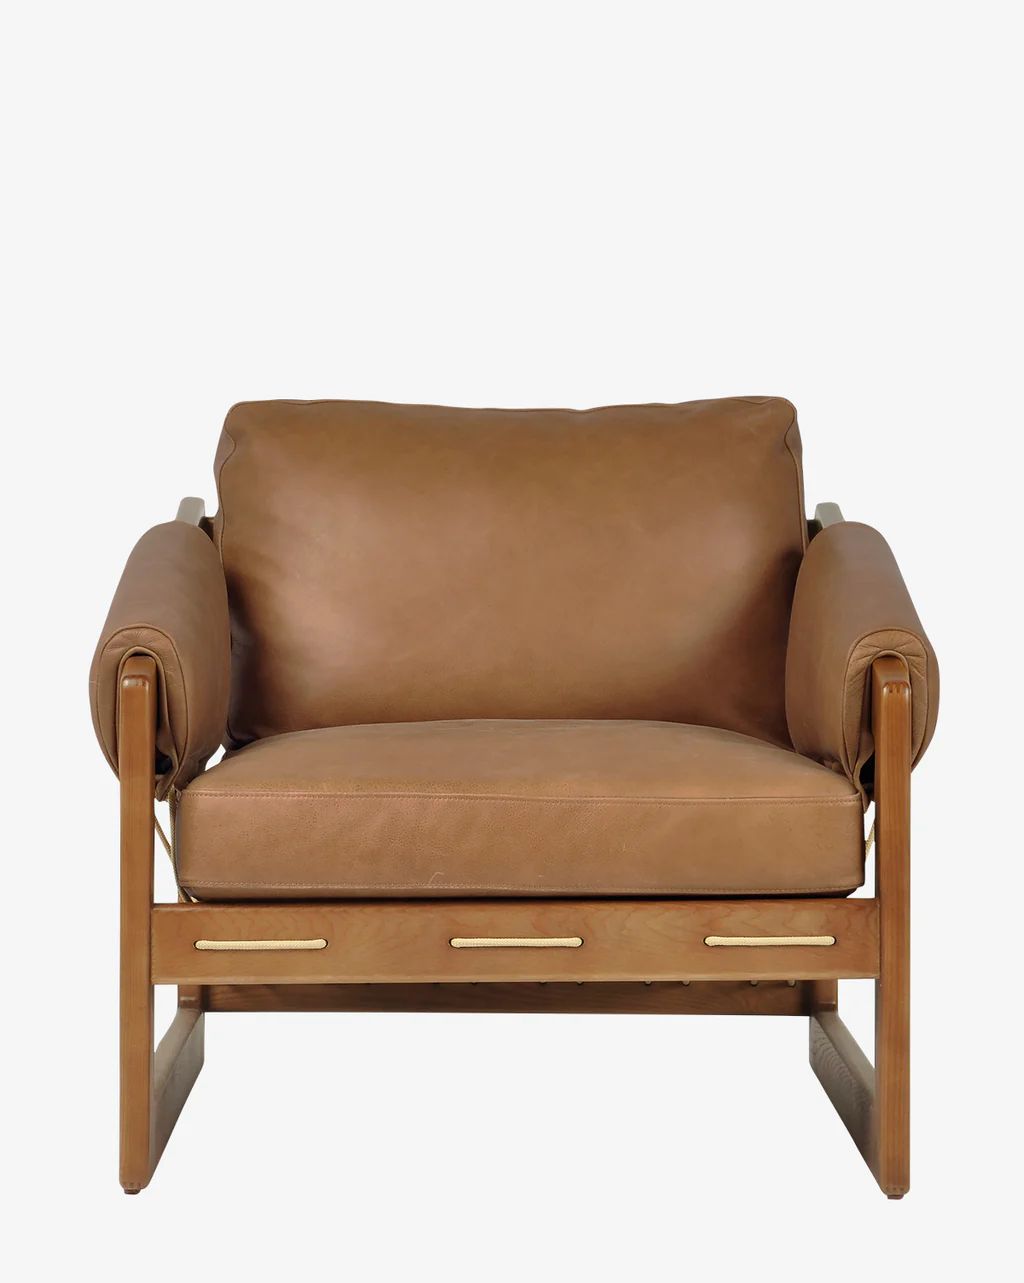 Barker Lounge Chair | McGee & Co.